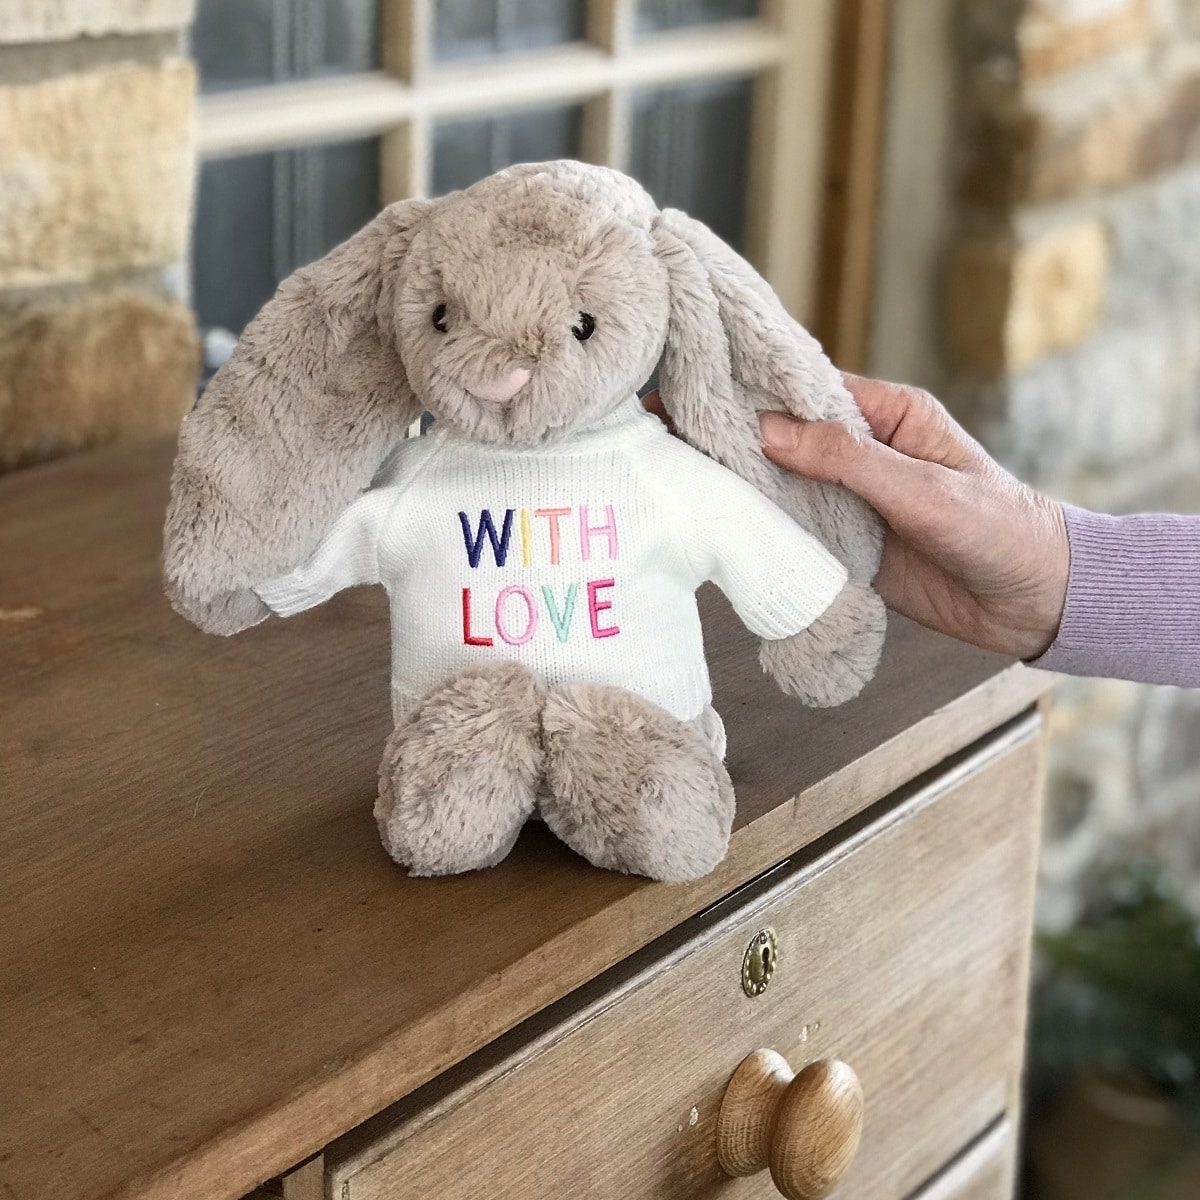 Jellycat bashful bunny soft toy with 'With Love' jumper